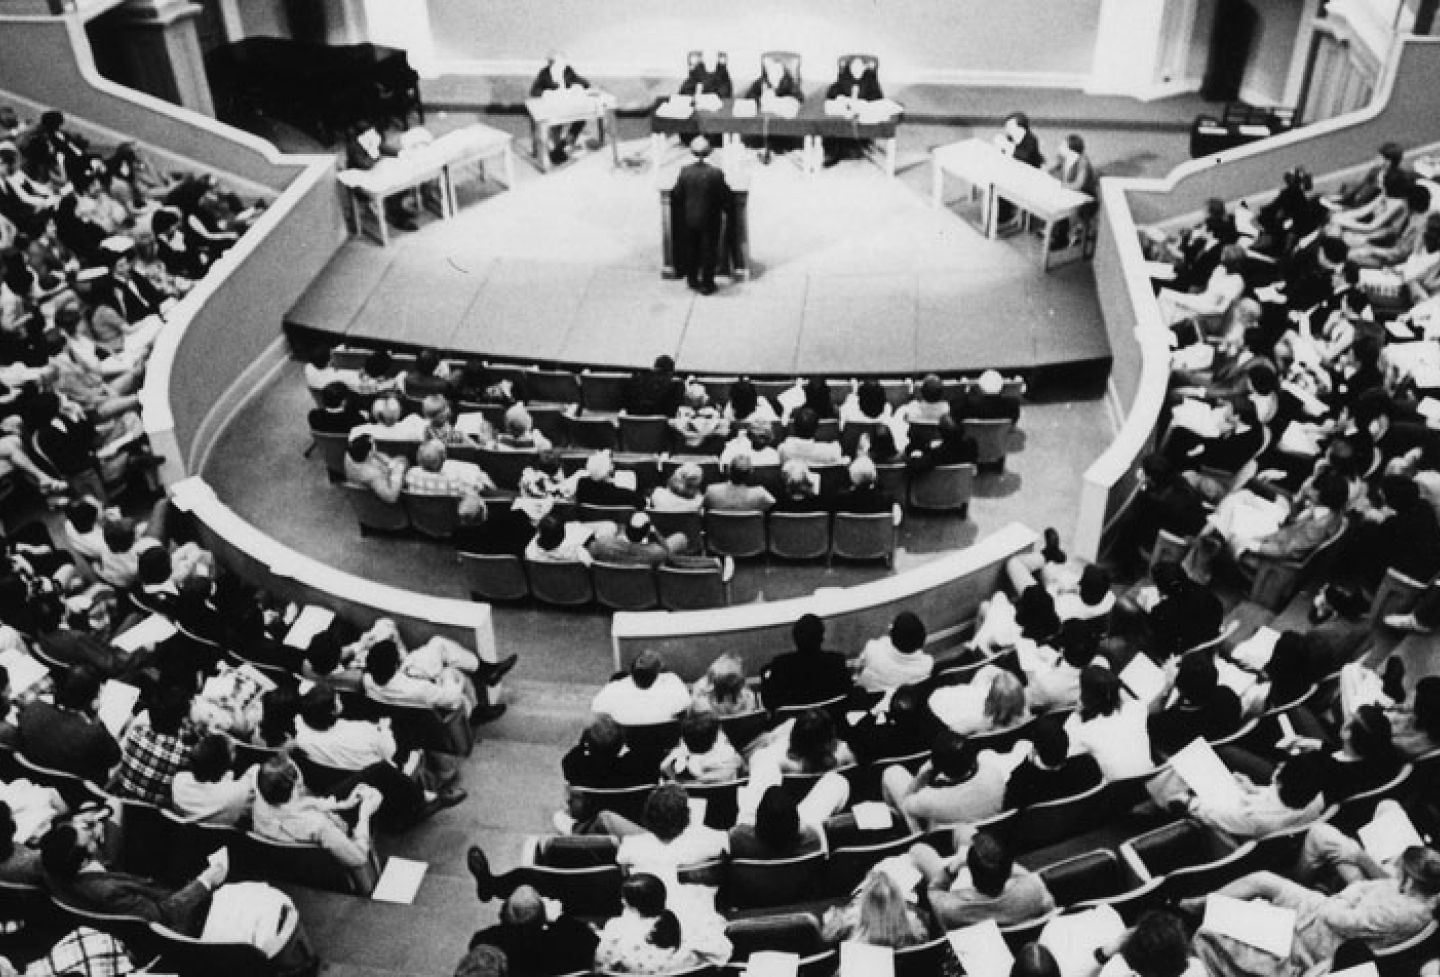 A view of Lile Moot Court, held in Old Cabell Hall